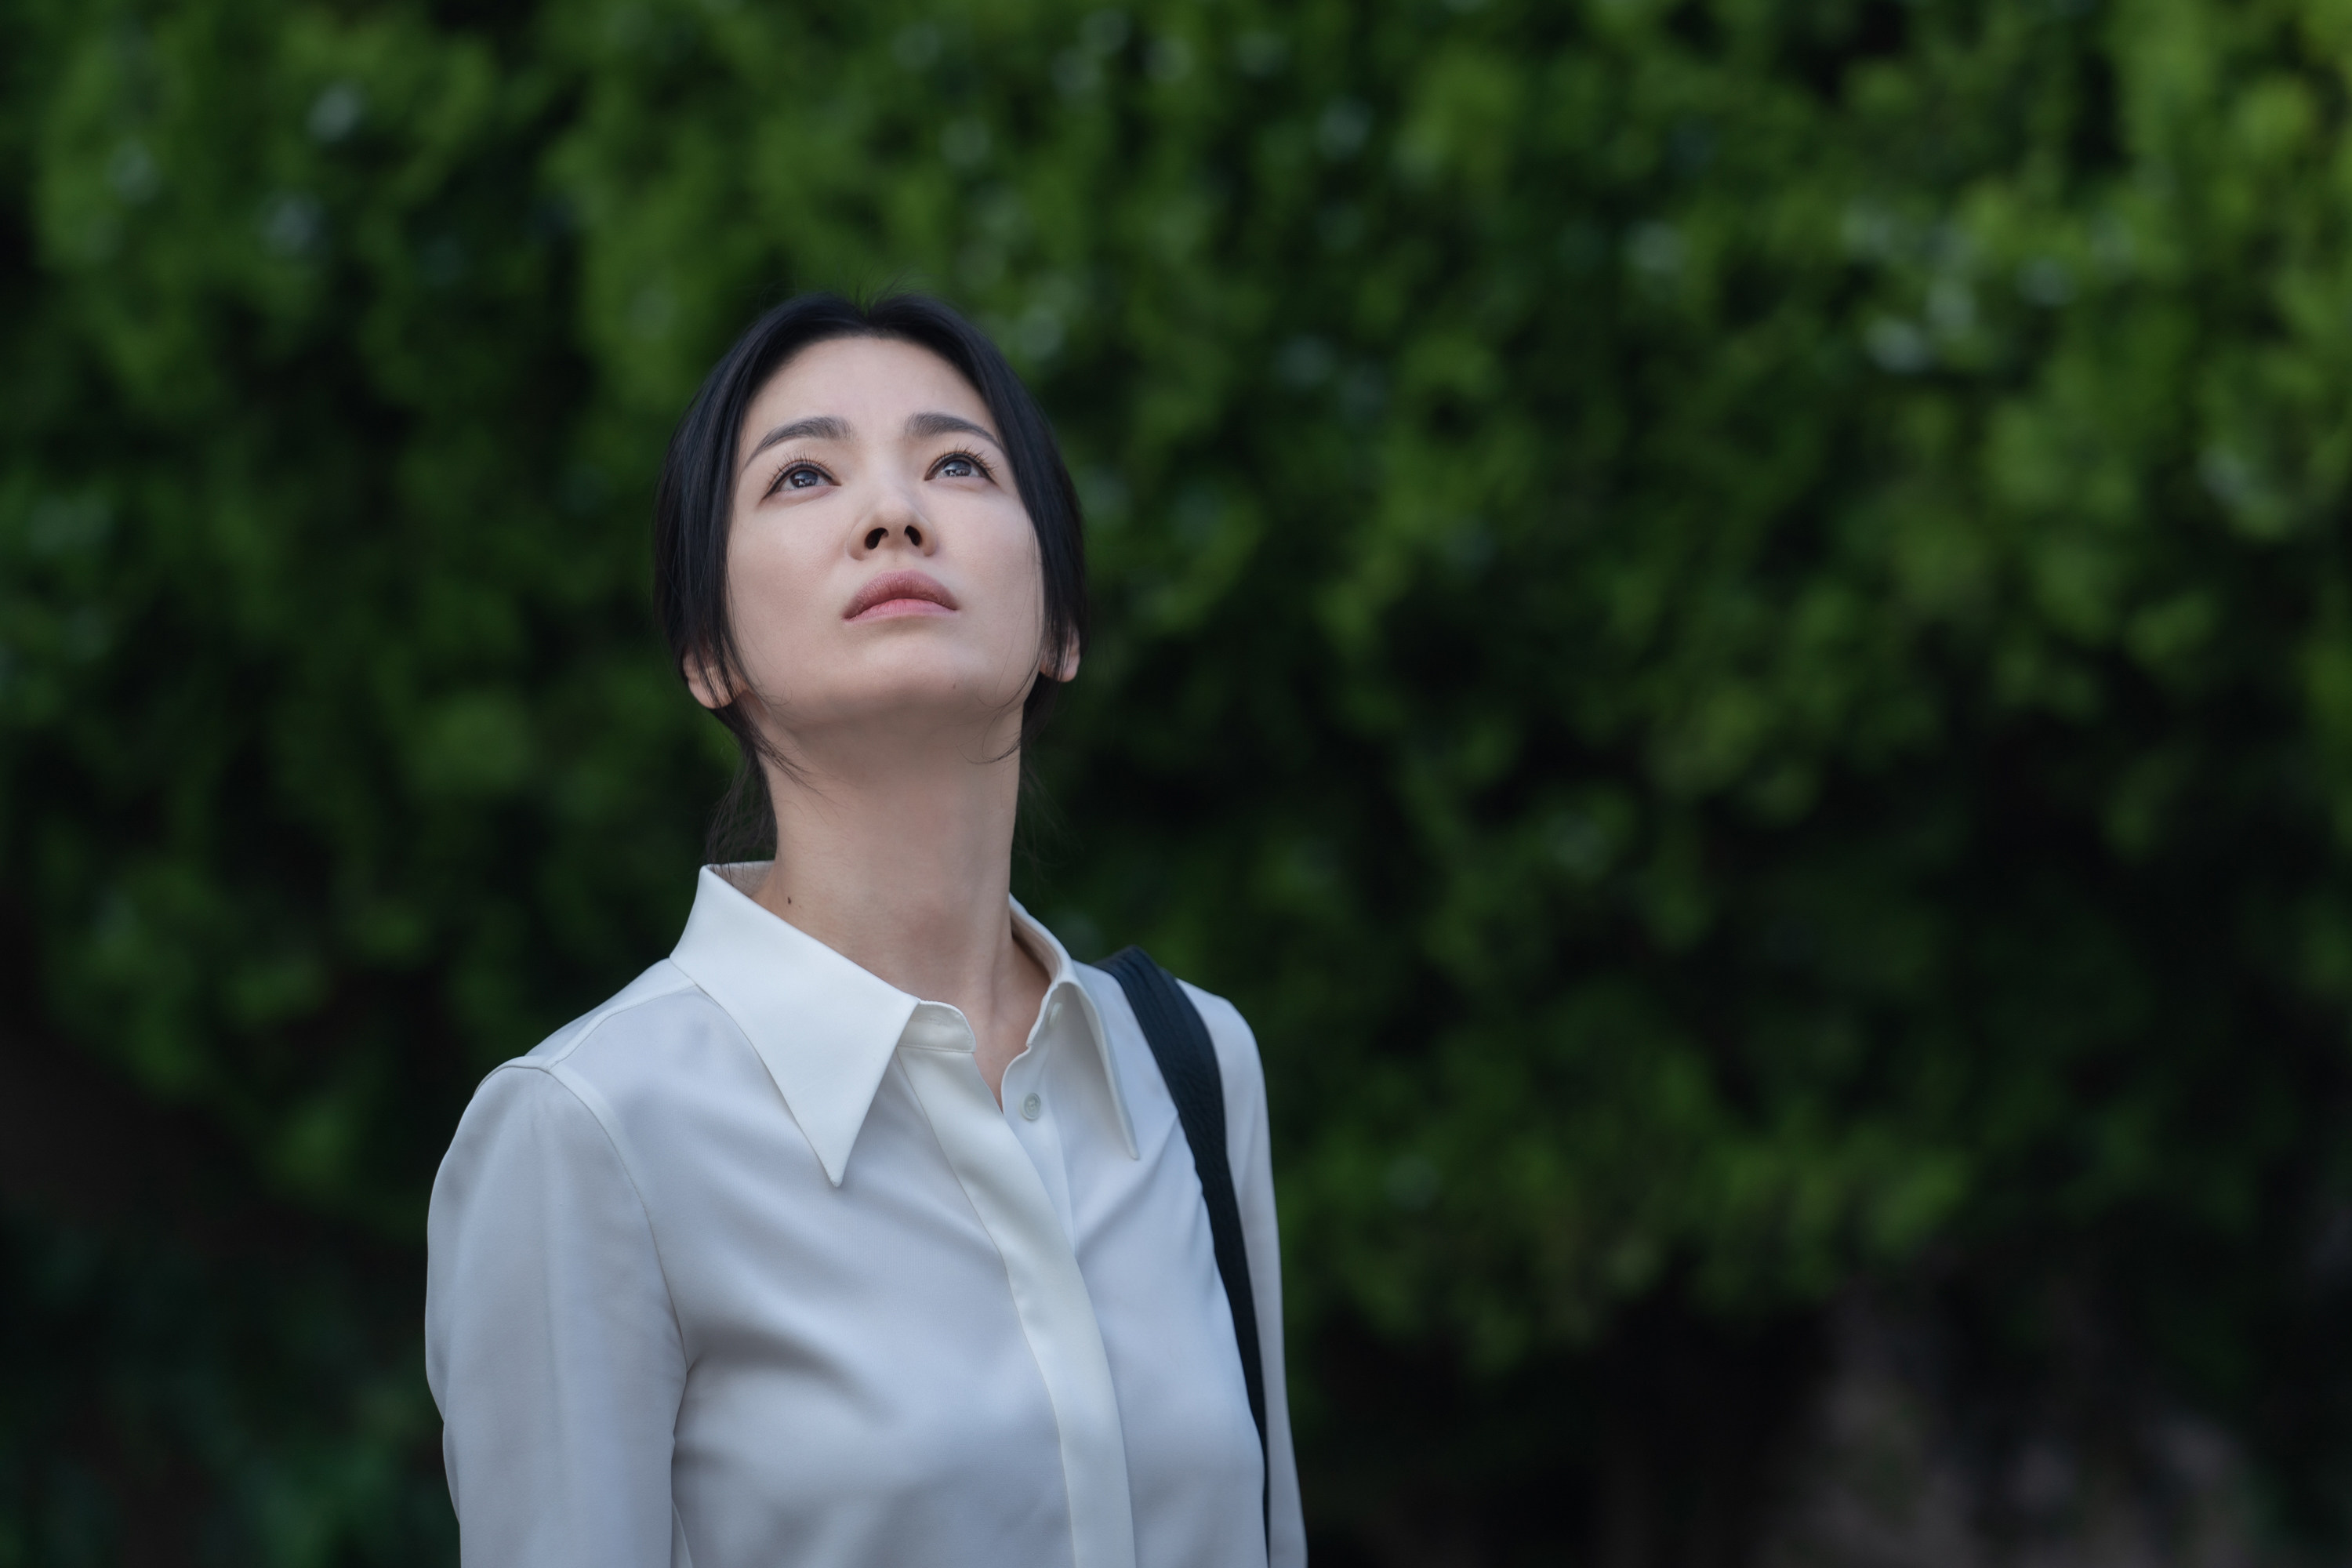 Song Hye-kyo as Moon Dong-eun in a still from “The Glory”. Photo: Graphyoda/Netflix